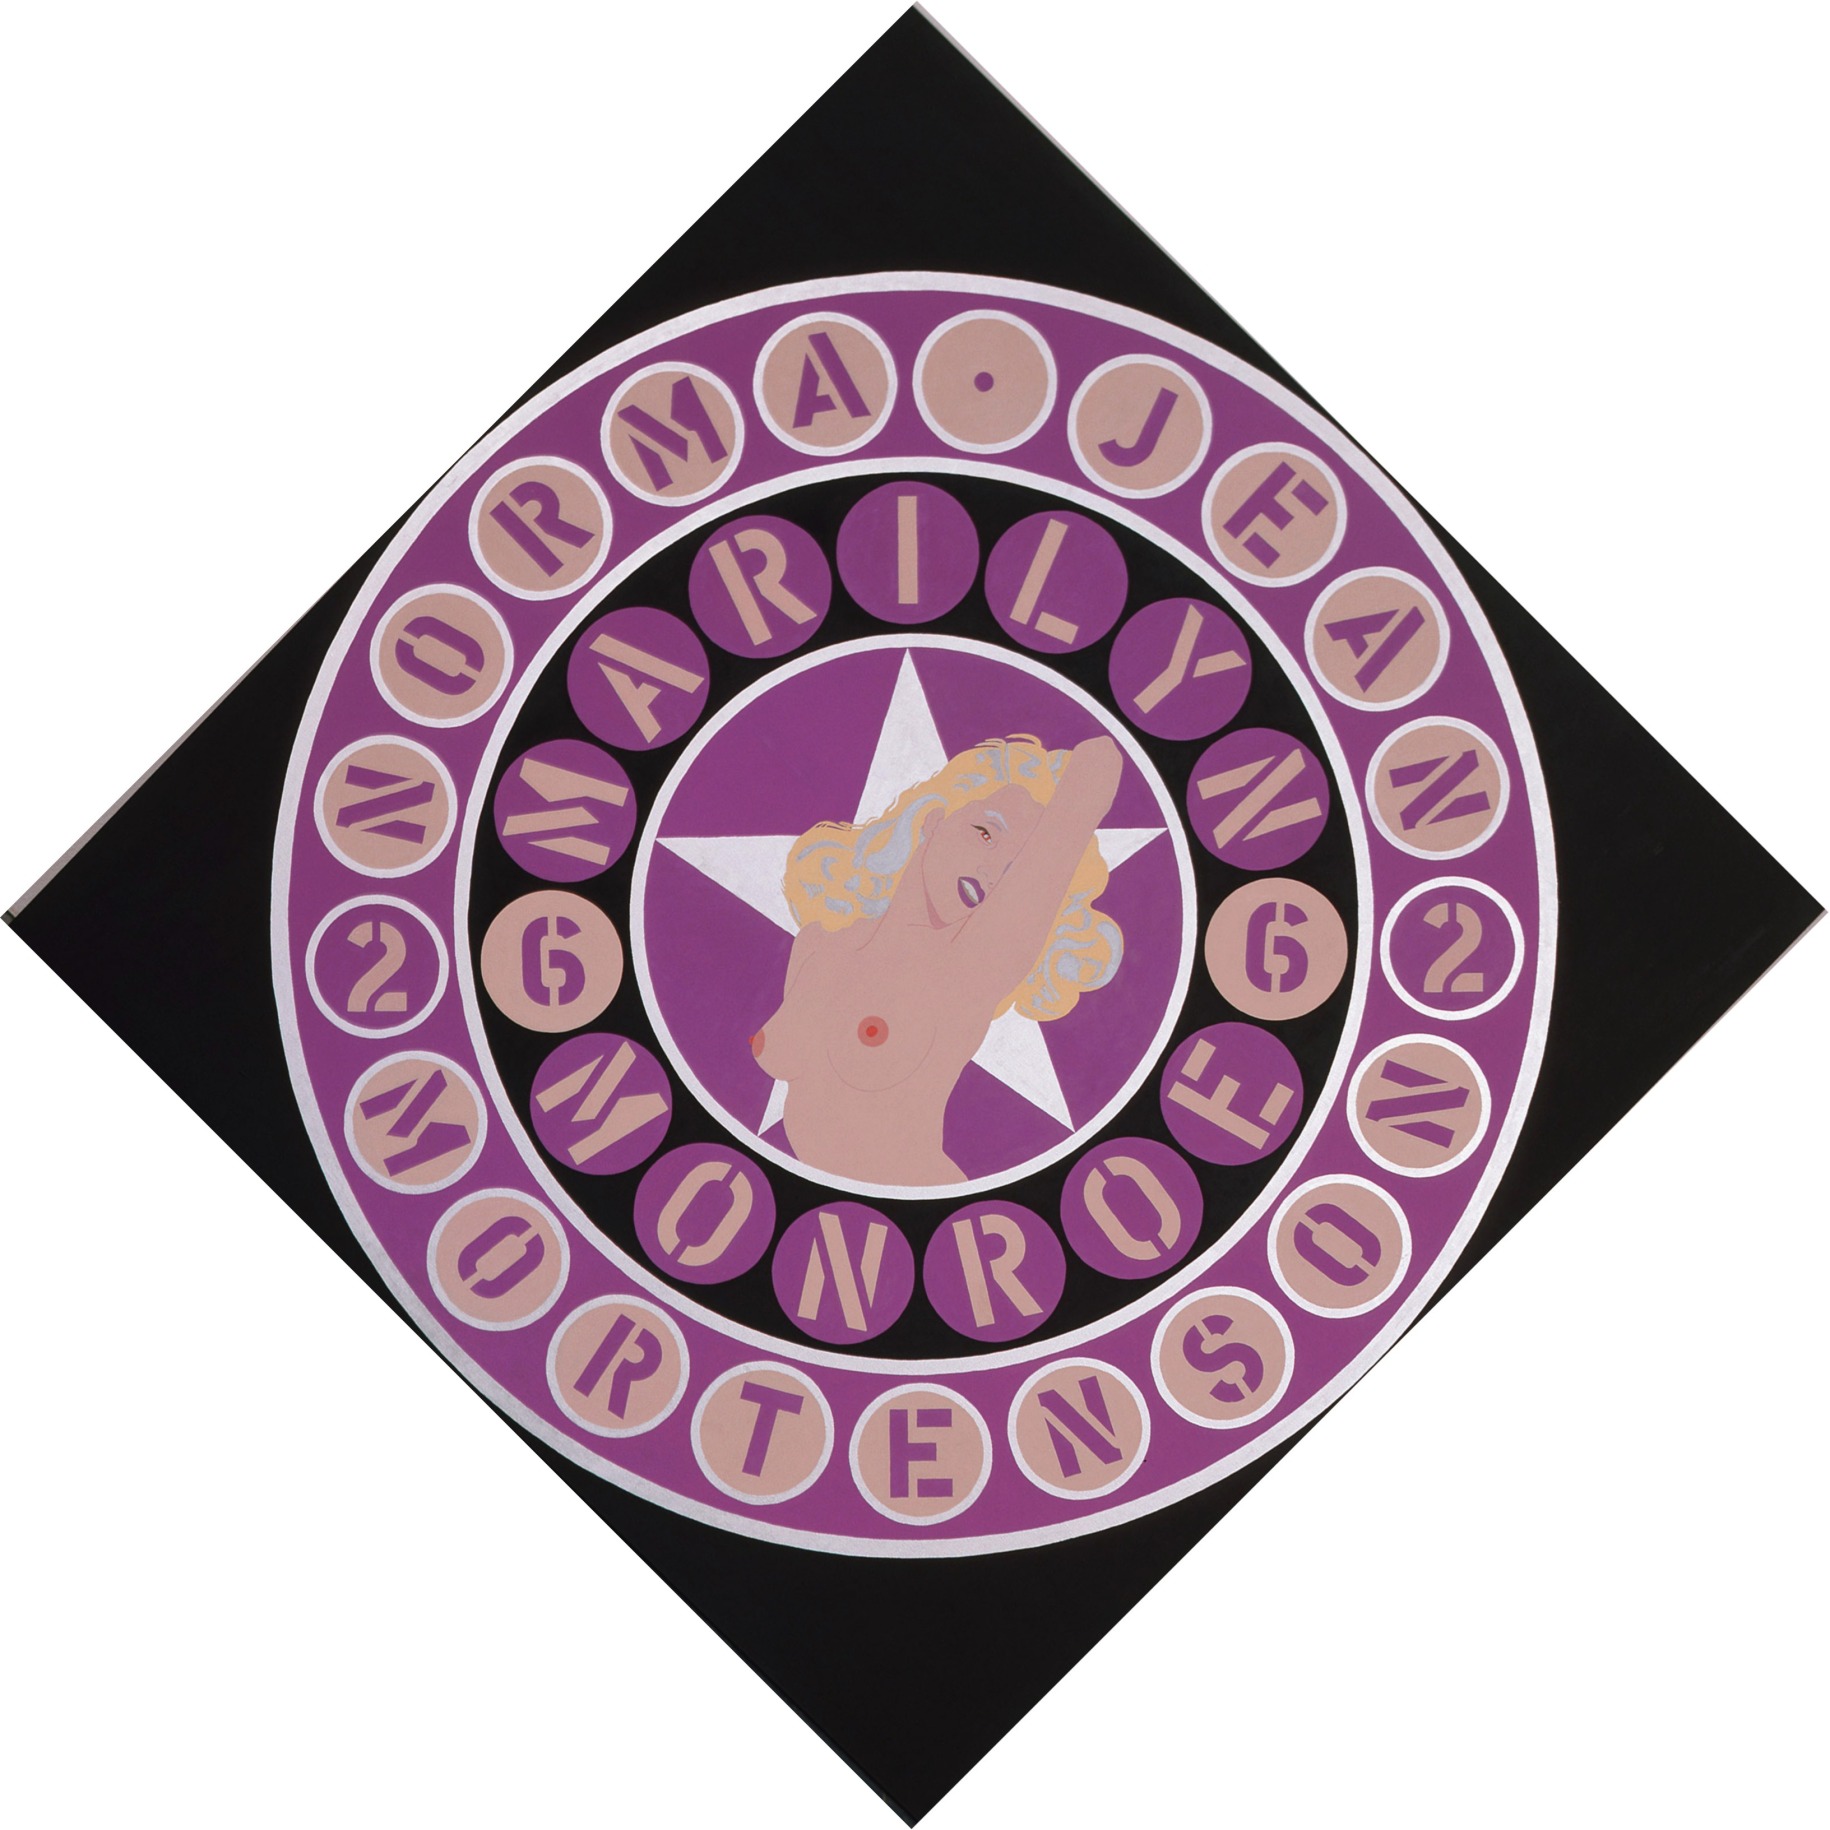 The Black Marilyn, a 102 by 102-inch black diamond shaped canvas. In the center of the painting is topless image of Monroe in front of a lilac star in a purple circle. Two rings of text surround this central image. The inner ring is black and contains the actress' name, Marilyn Monroe. Each lilac letter is in a separate purple ring, and separating her first and last name to the left and right of the inner circle is a purple numeral six in a lilac circle. The purple outer ring contains the actress' birth name, Norma Jean Mortenson, each individual purple letter in a lilac circle. Separating her first names and last name are two lilac purple numeral twos each in a purple circle.